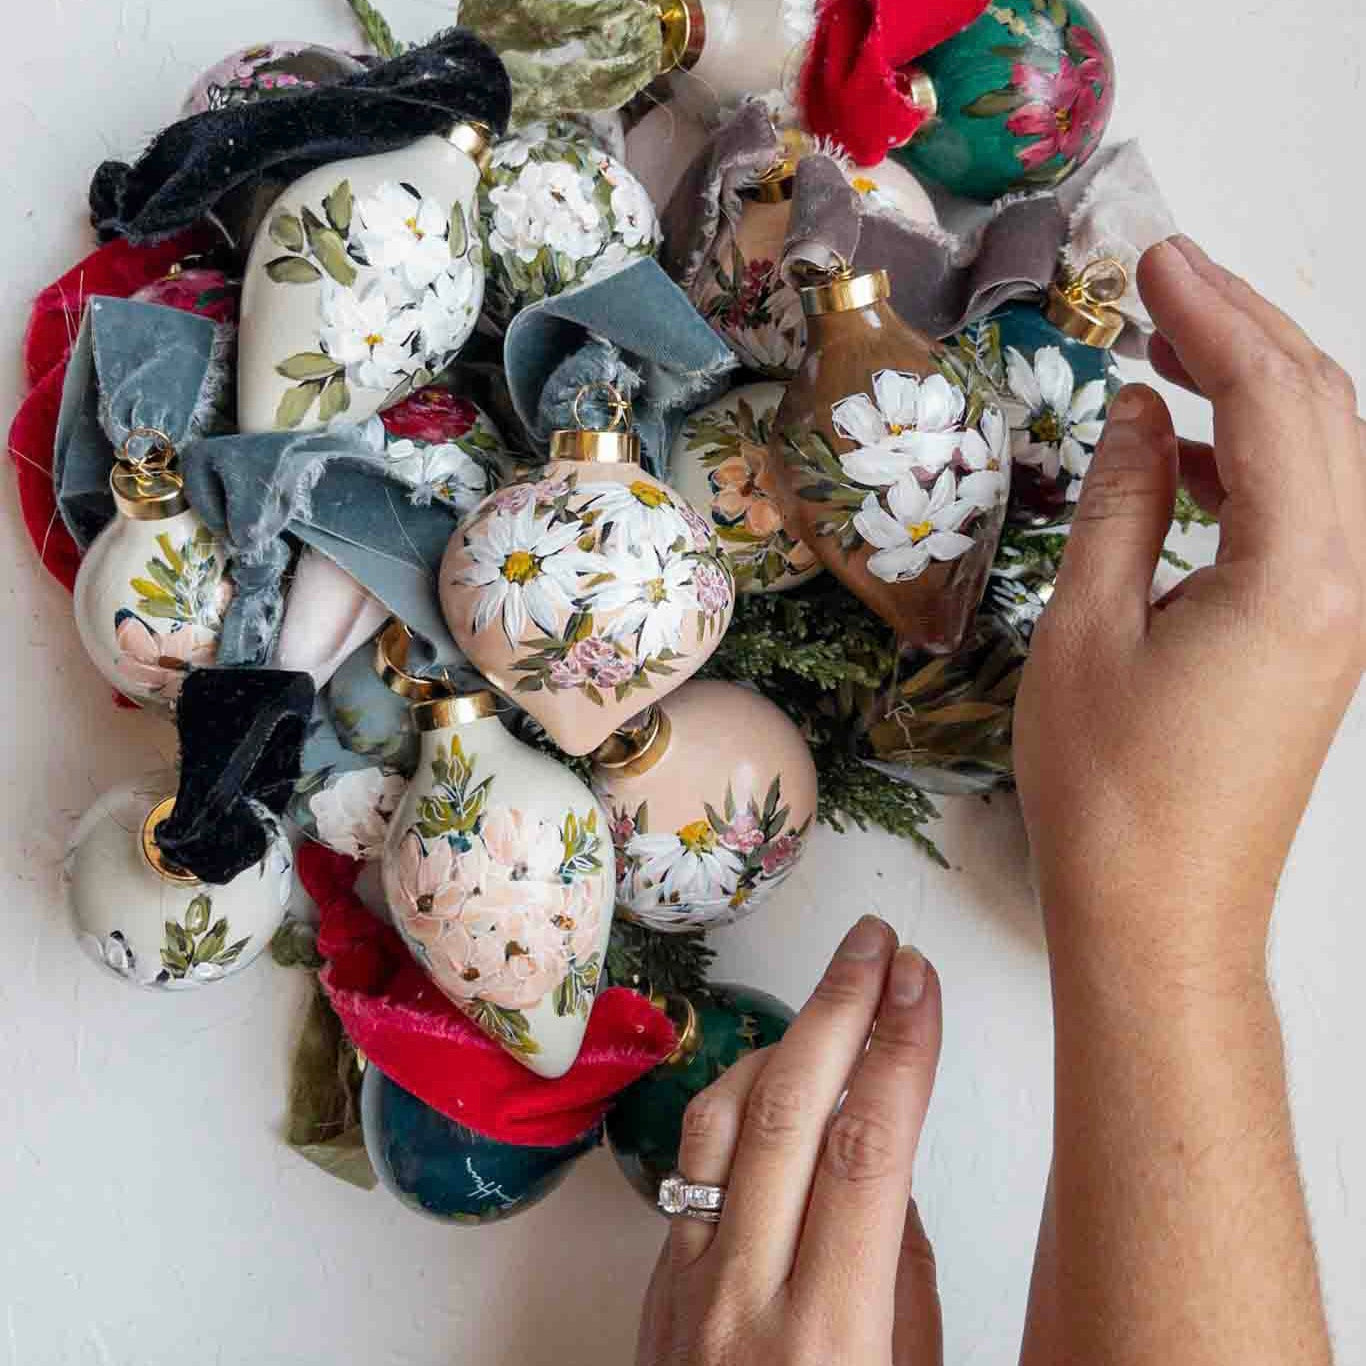 Heirloom Ornament - Floral 17